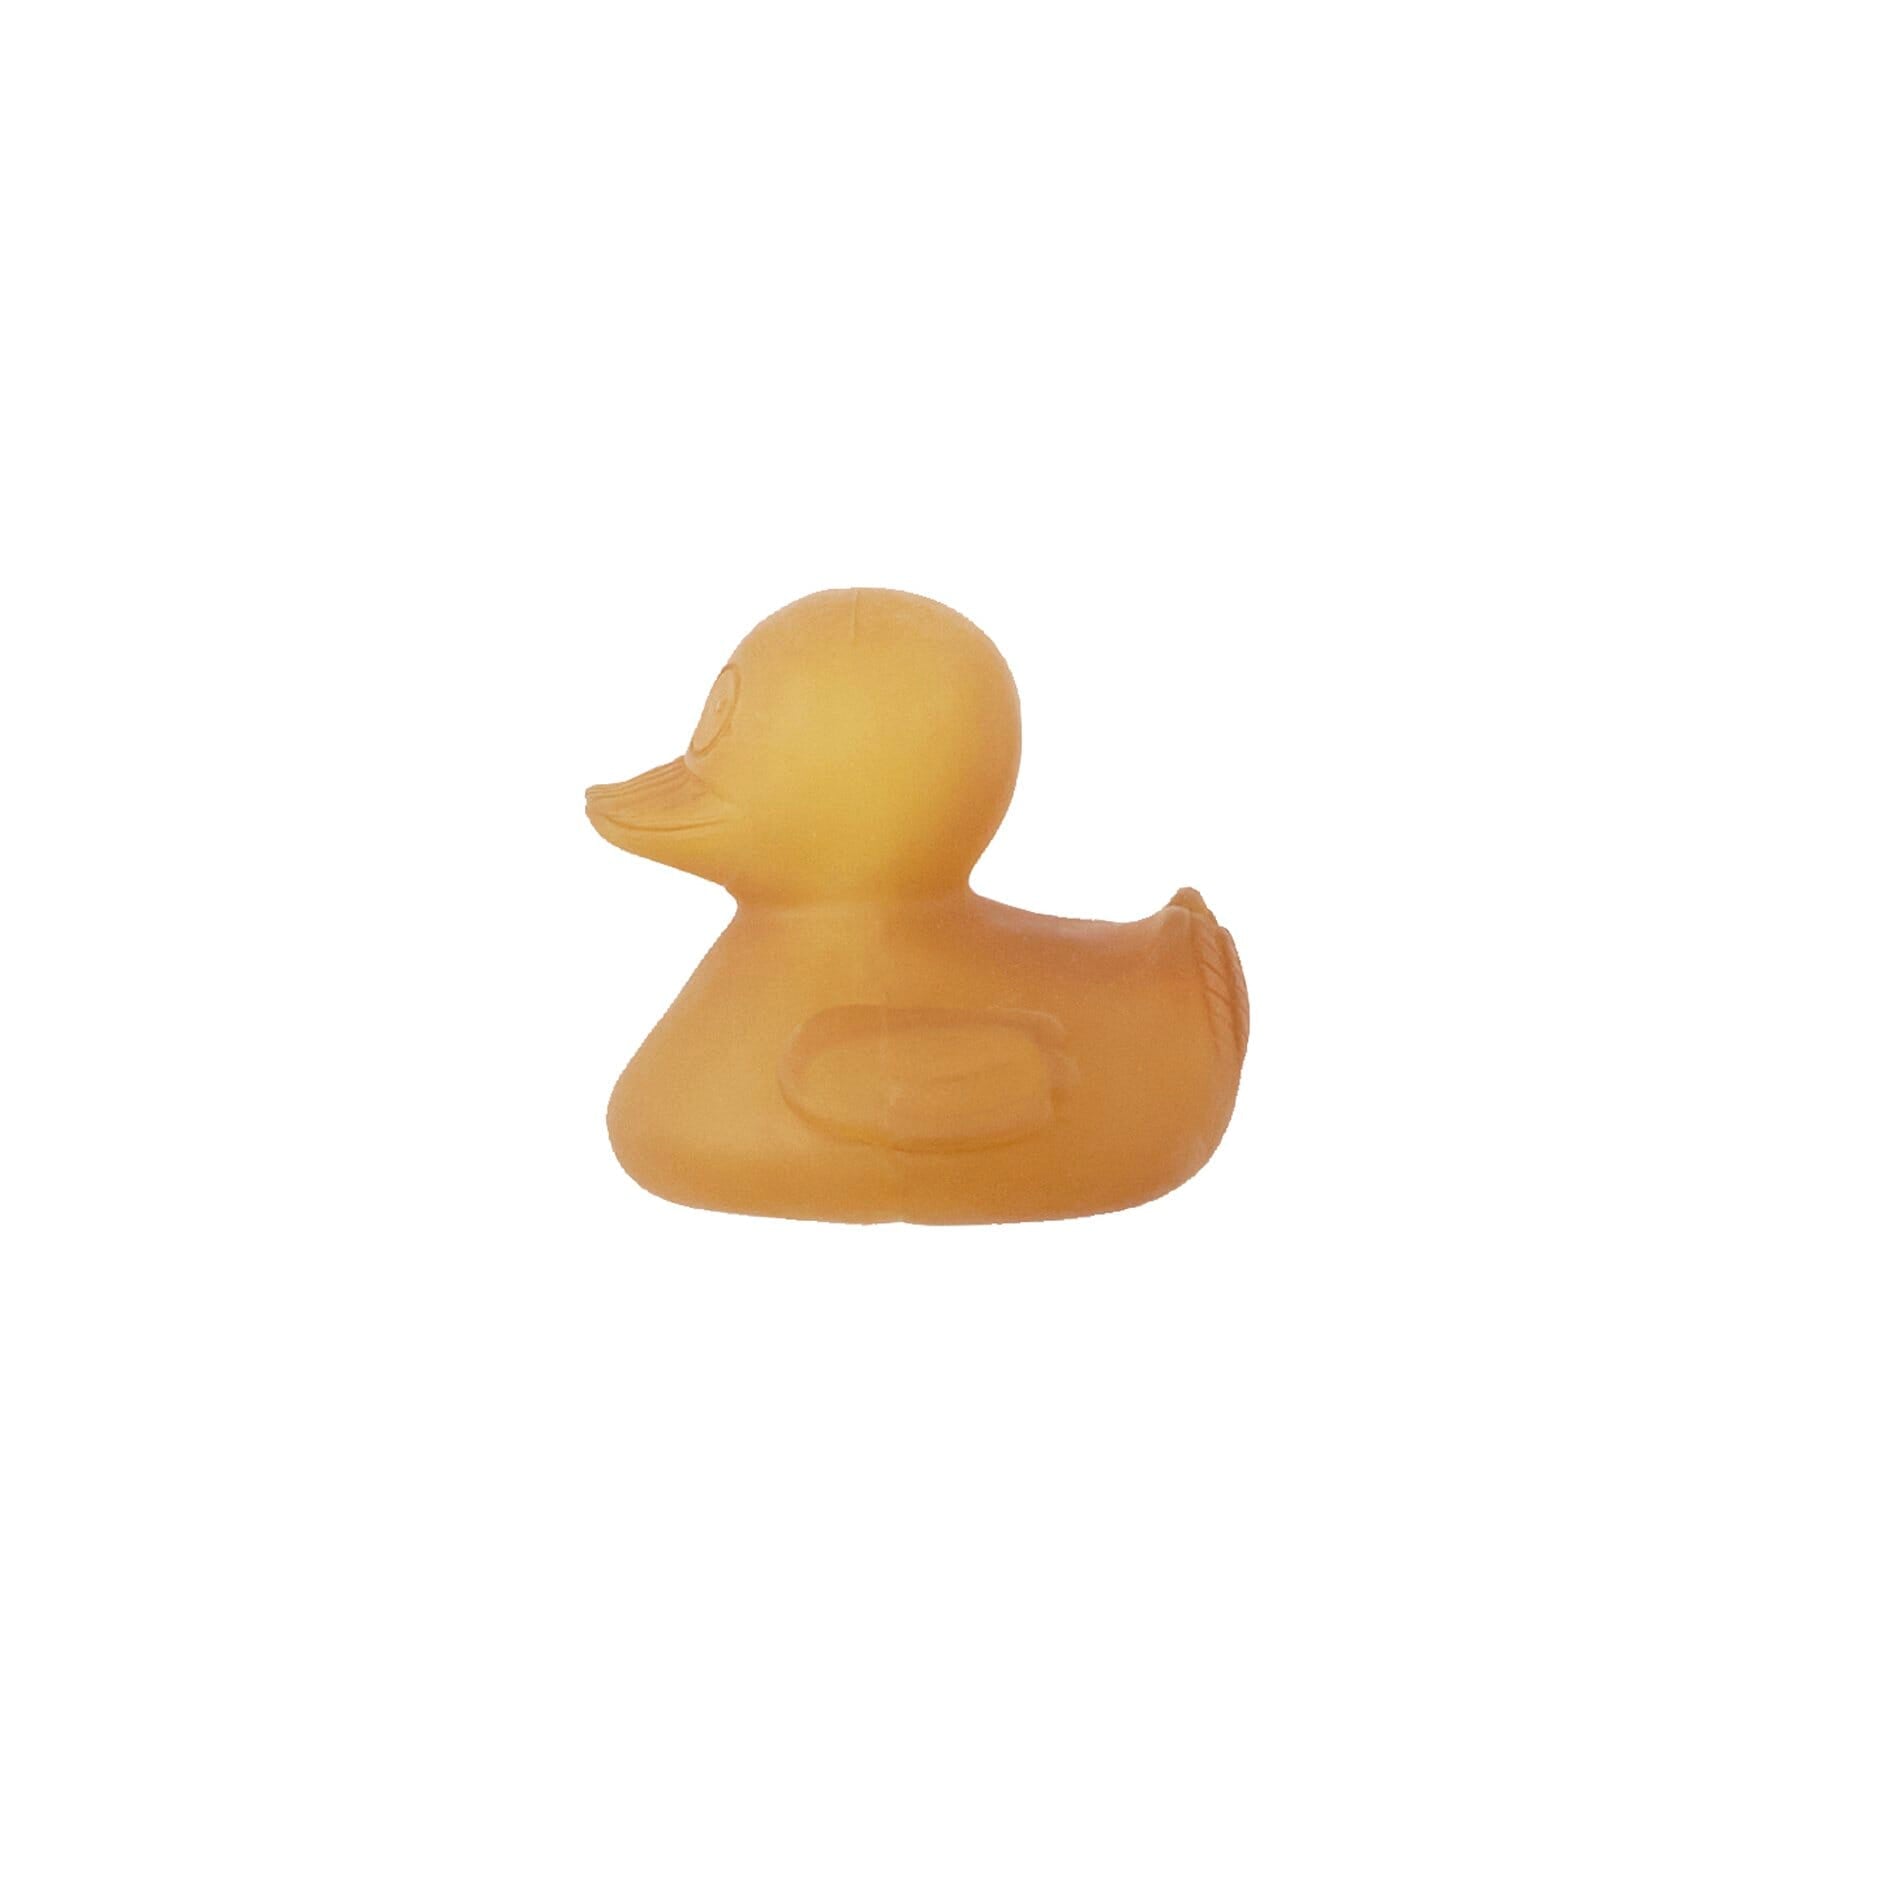 Alfie the duck. Natural Rubber Bath Toy Free of Holes.